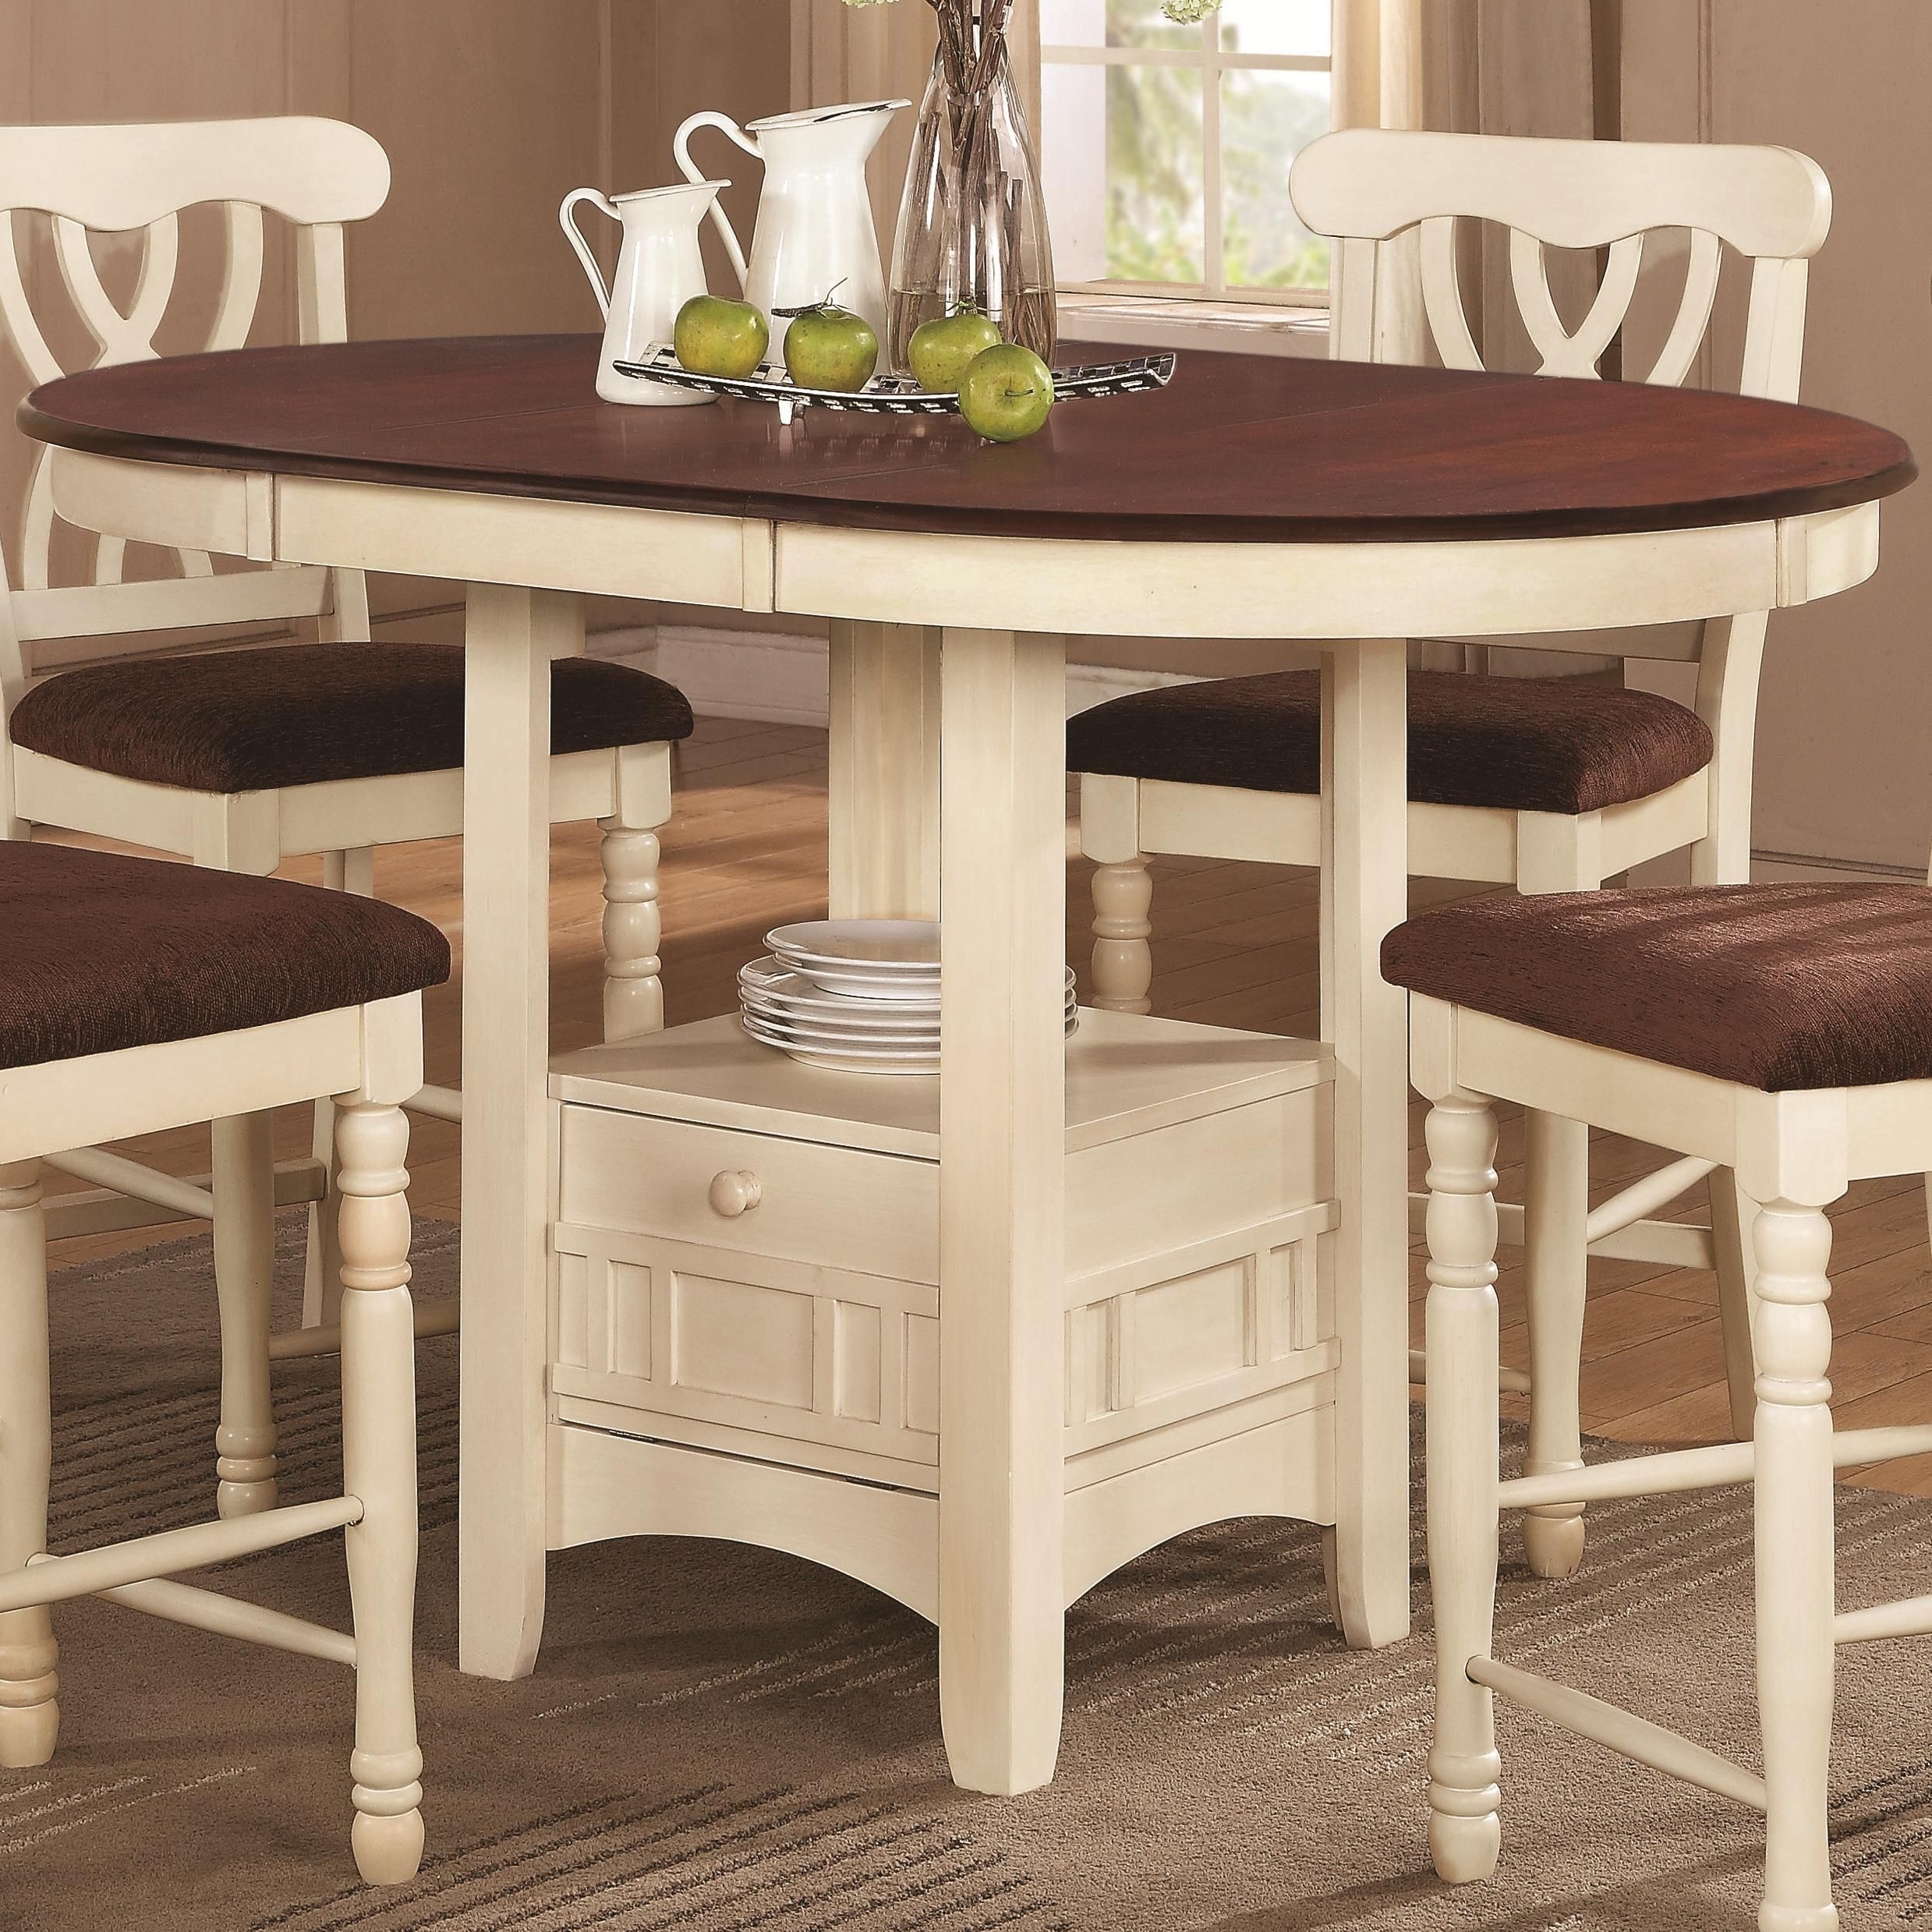 Crate and barrel round dining table